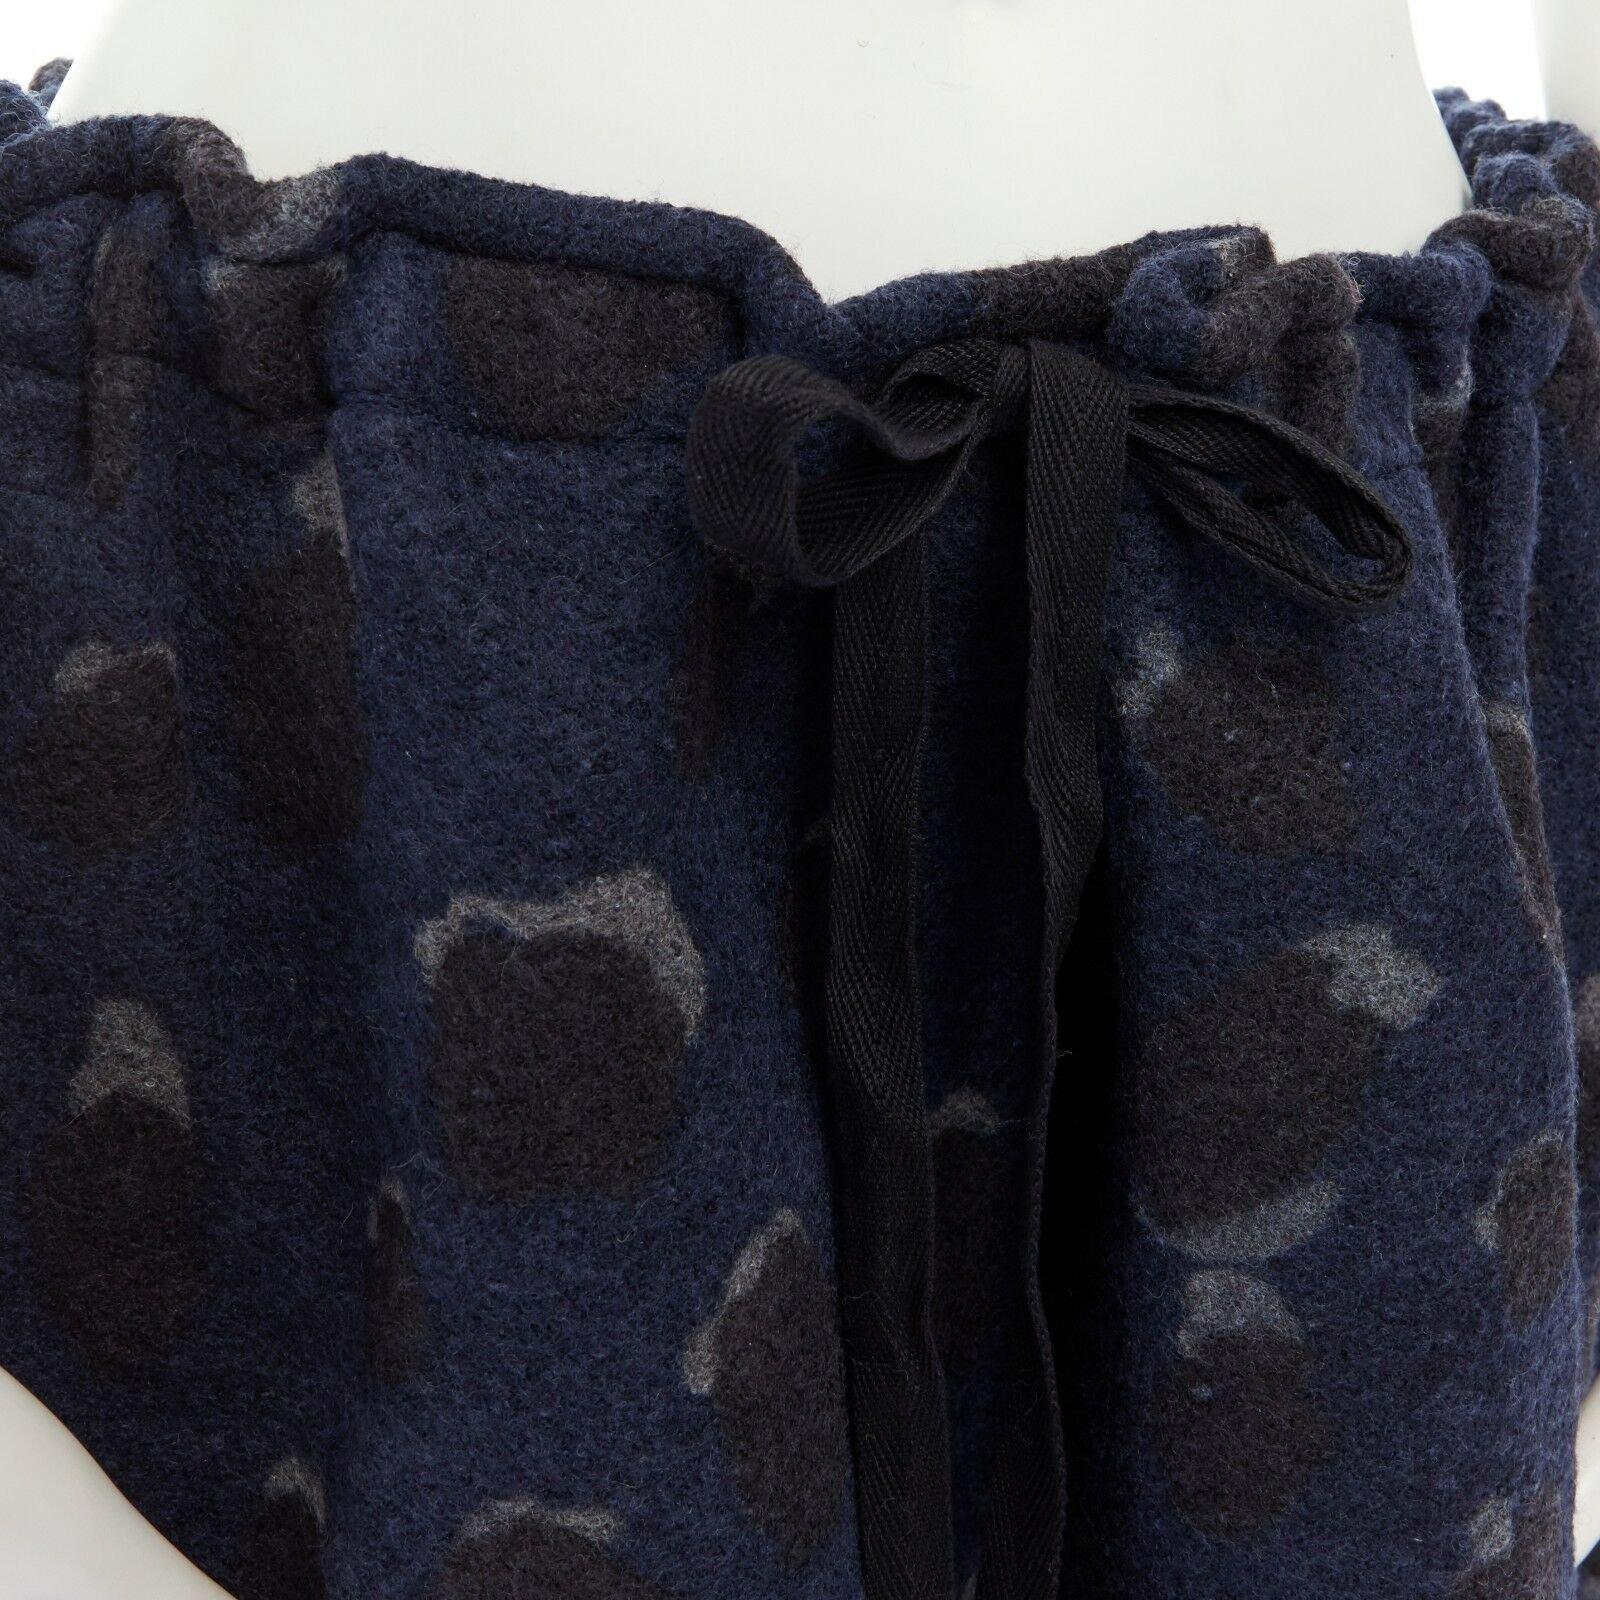 ACNE STUDIOS navy blue spot wool dropped crotch flared culotte pants FR36 S 3